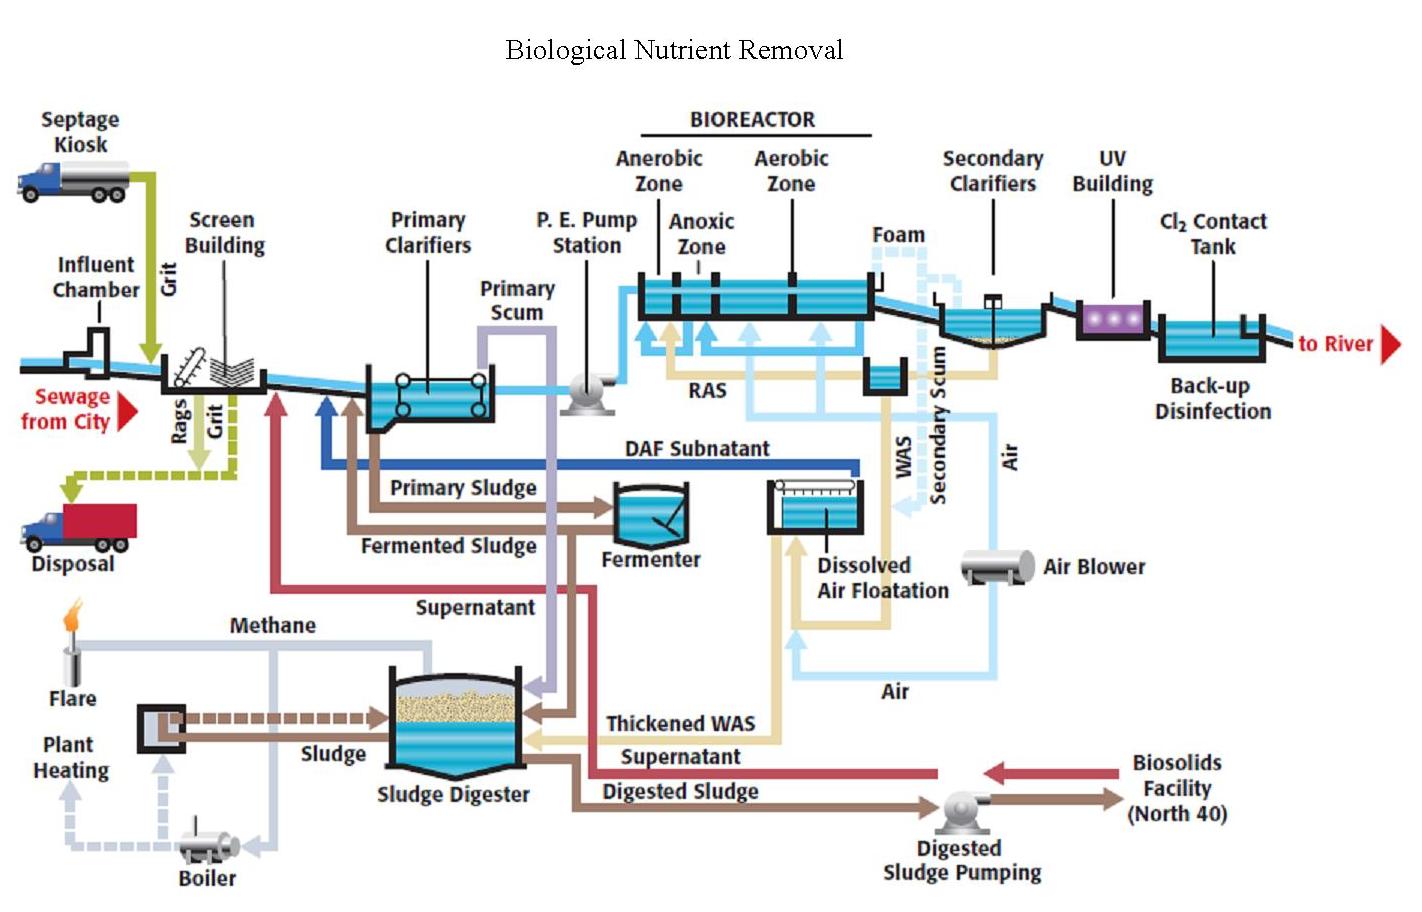 Wastewater Treatment Processes